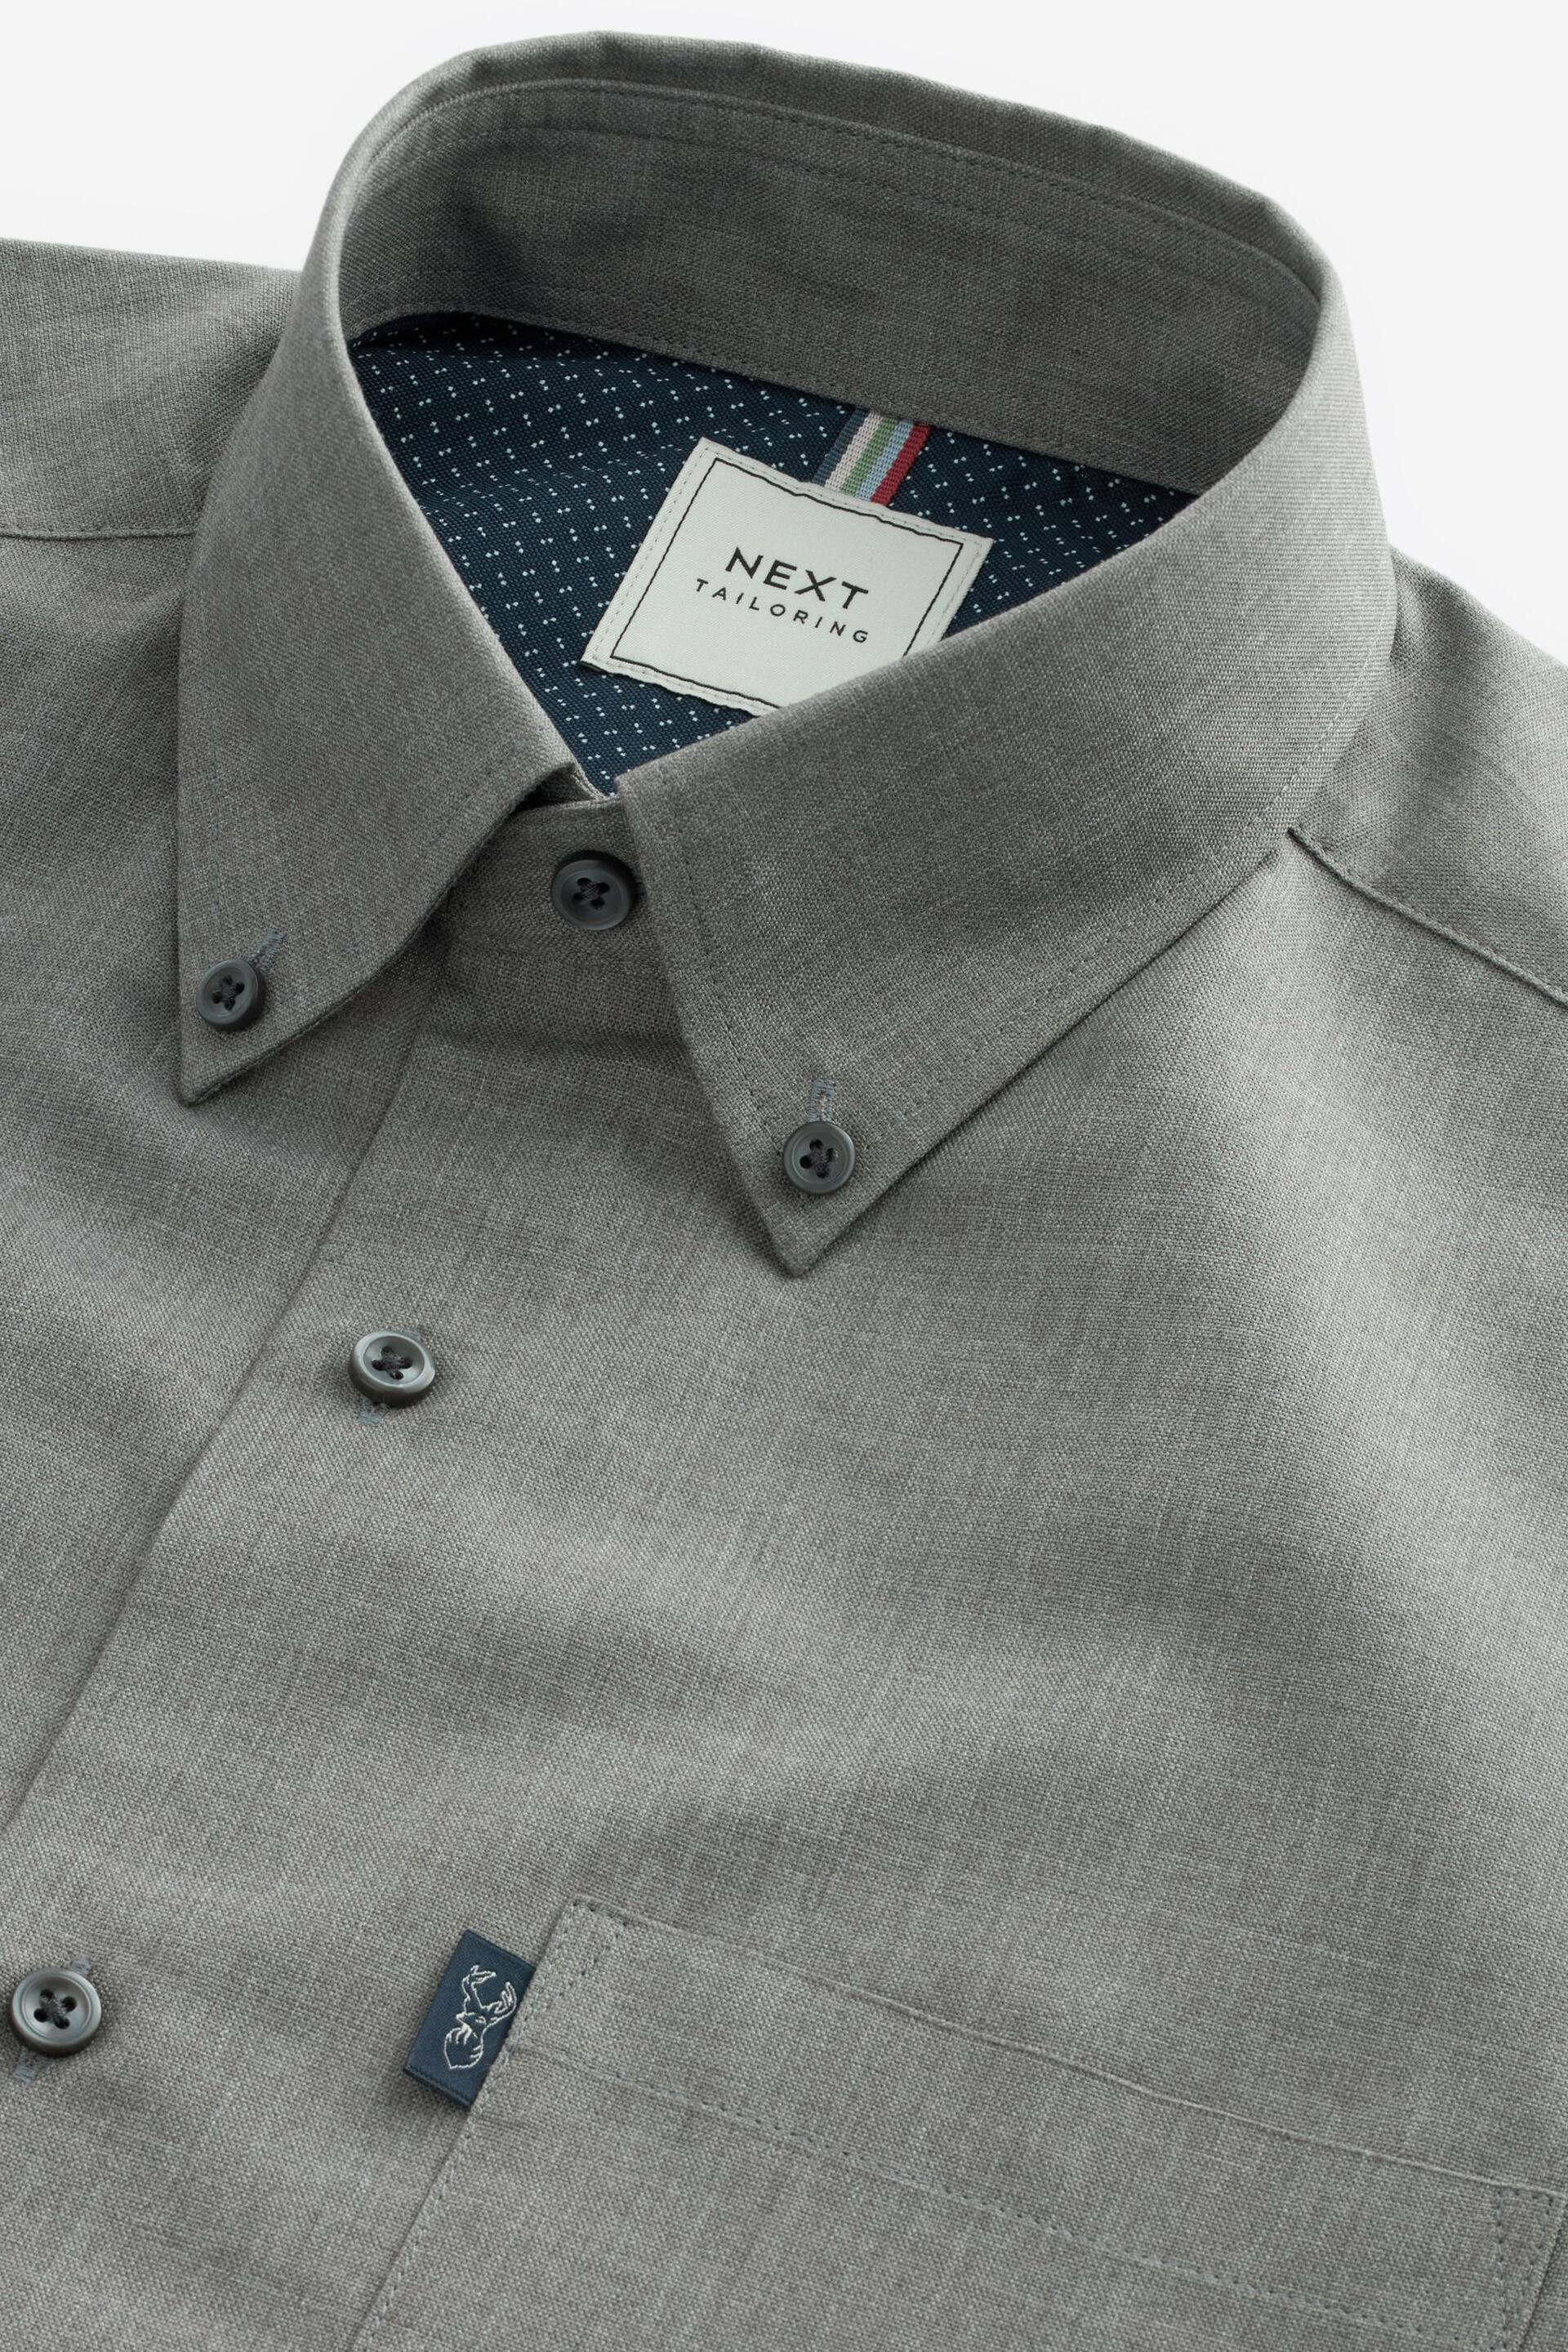 Grey Marl Regular Fit Easy Iron Button Down Oxford Shirt - Image 5 of 6